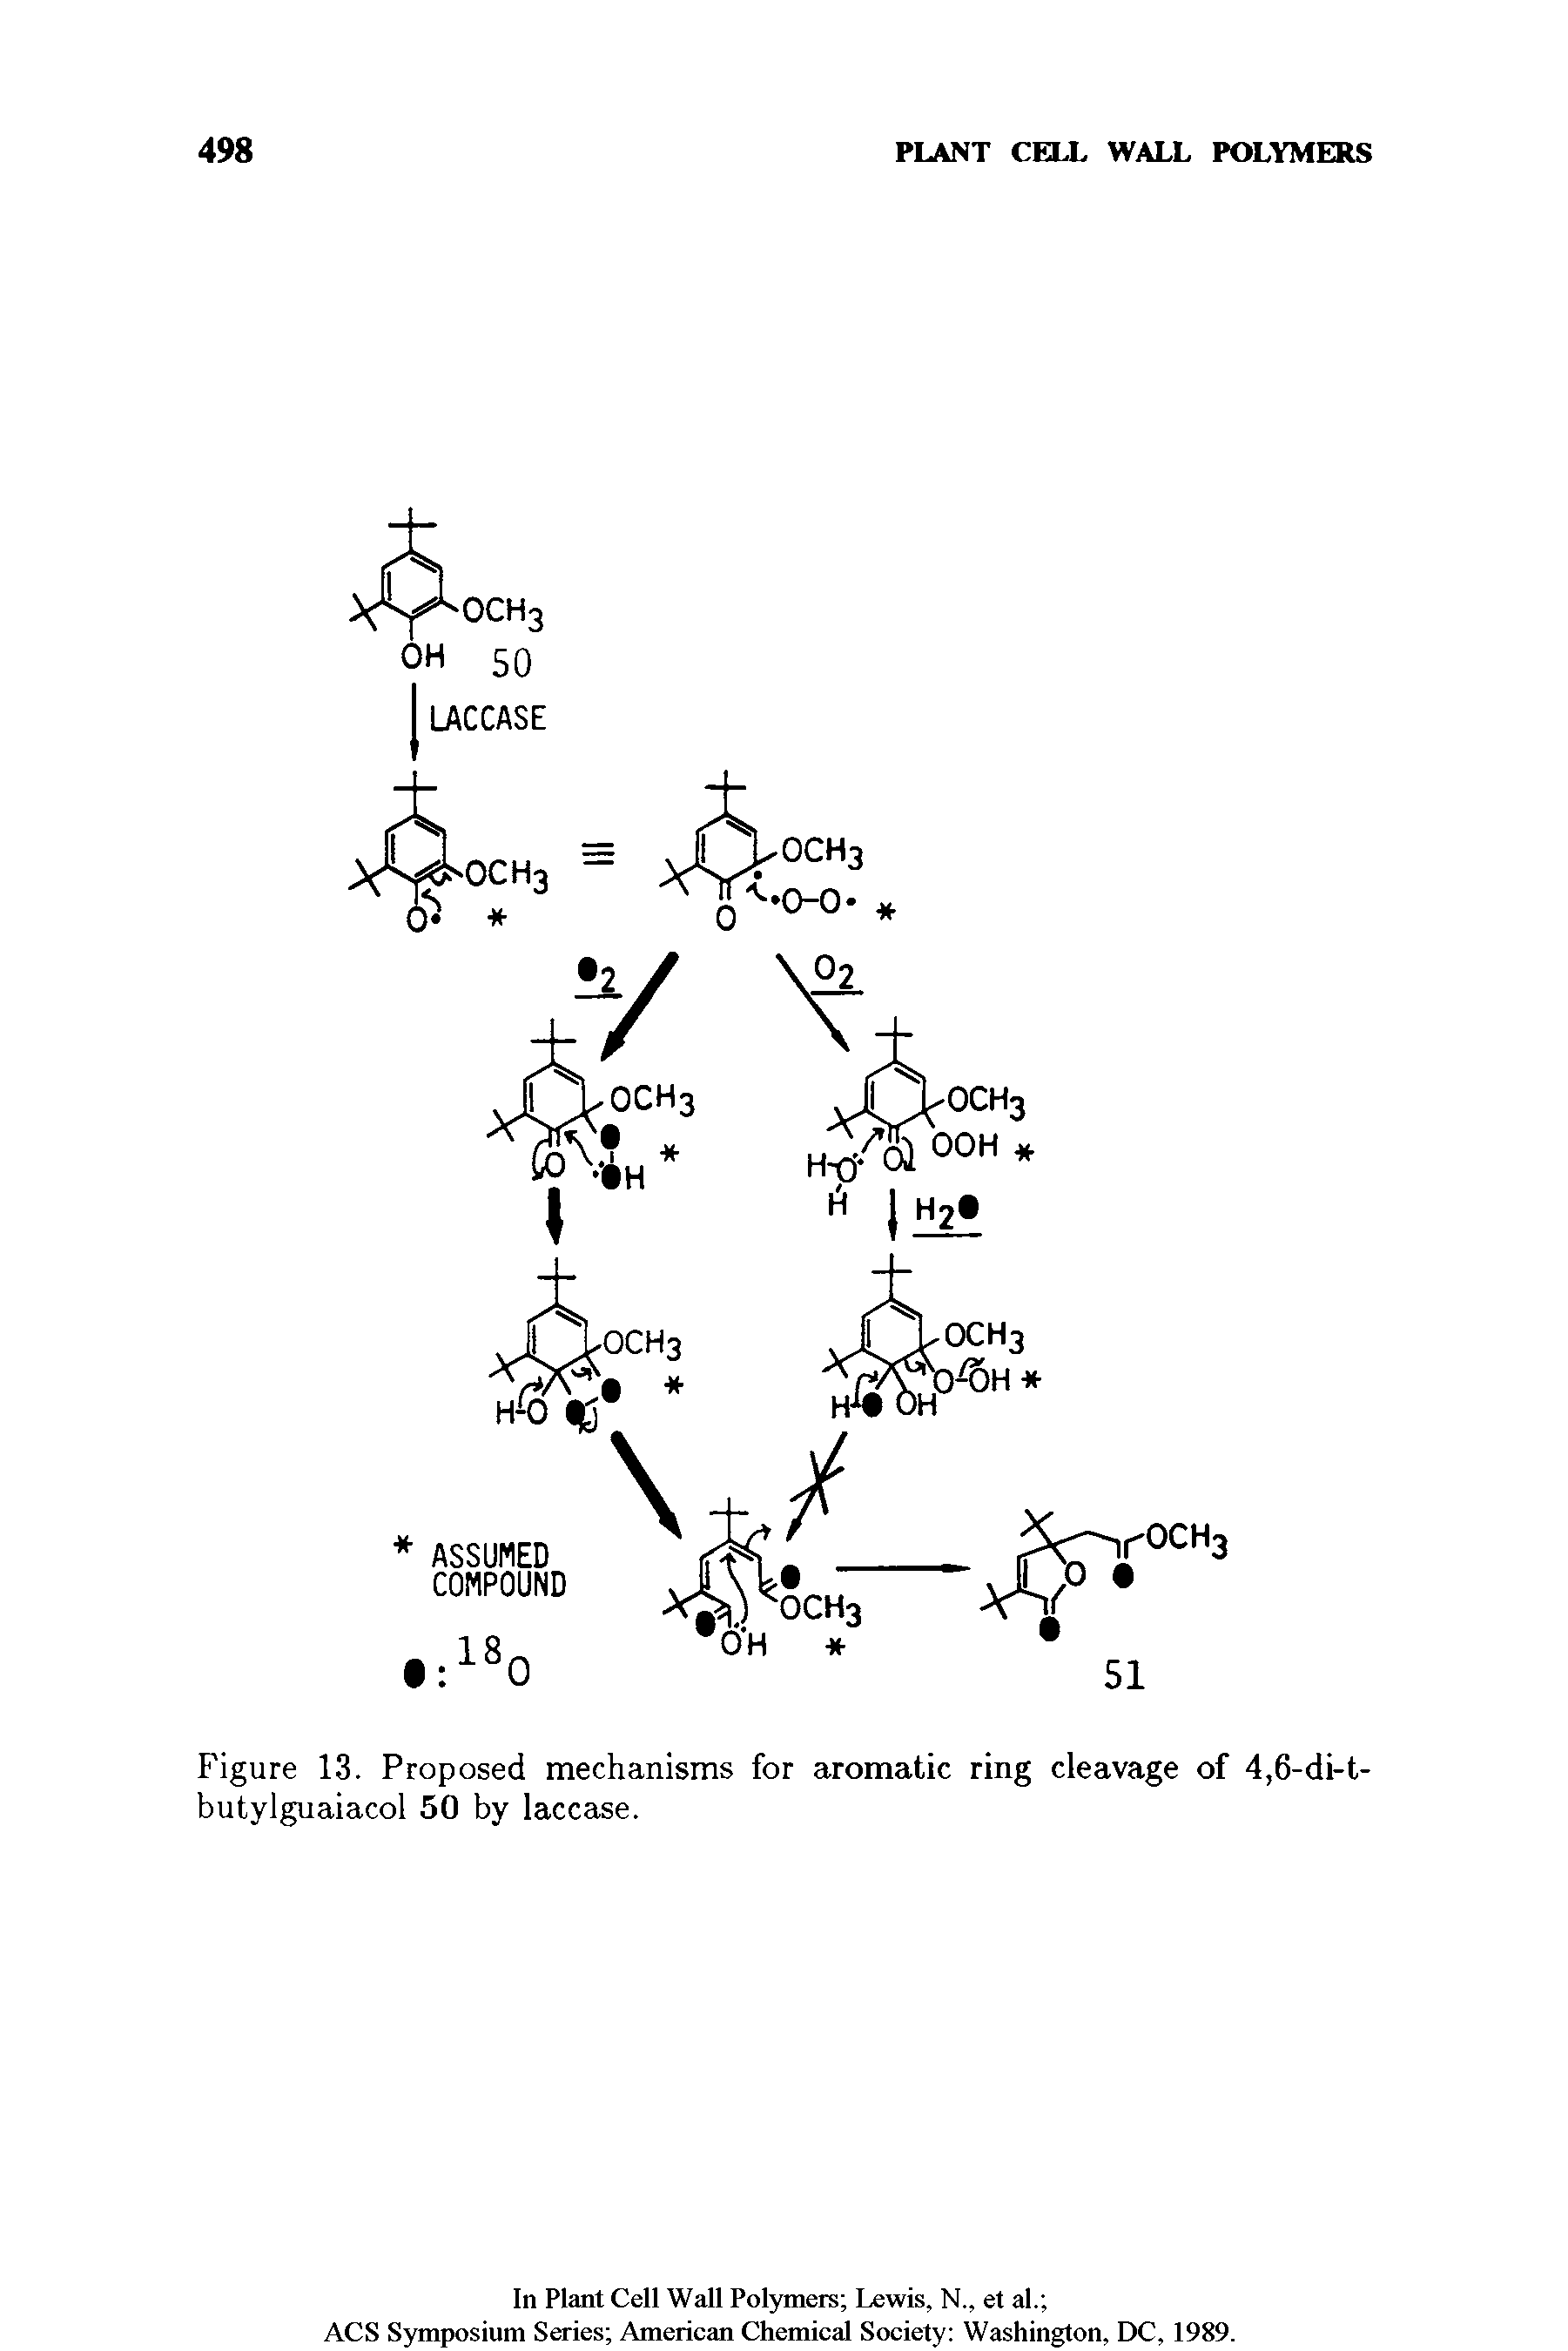 Figure 13. Proposed mechanisms for aromatic ring cleavage of 4,6-di-t-butylguaiacol 50 by laccase.